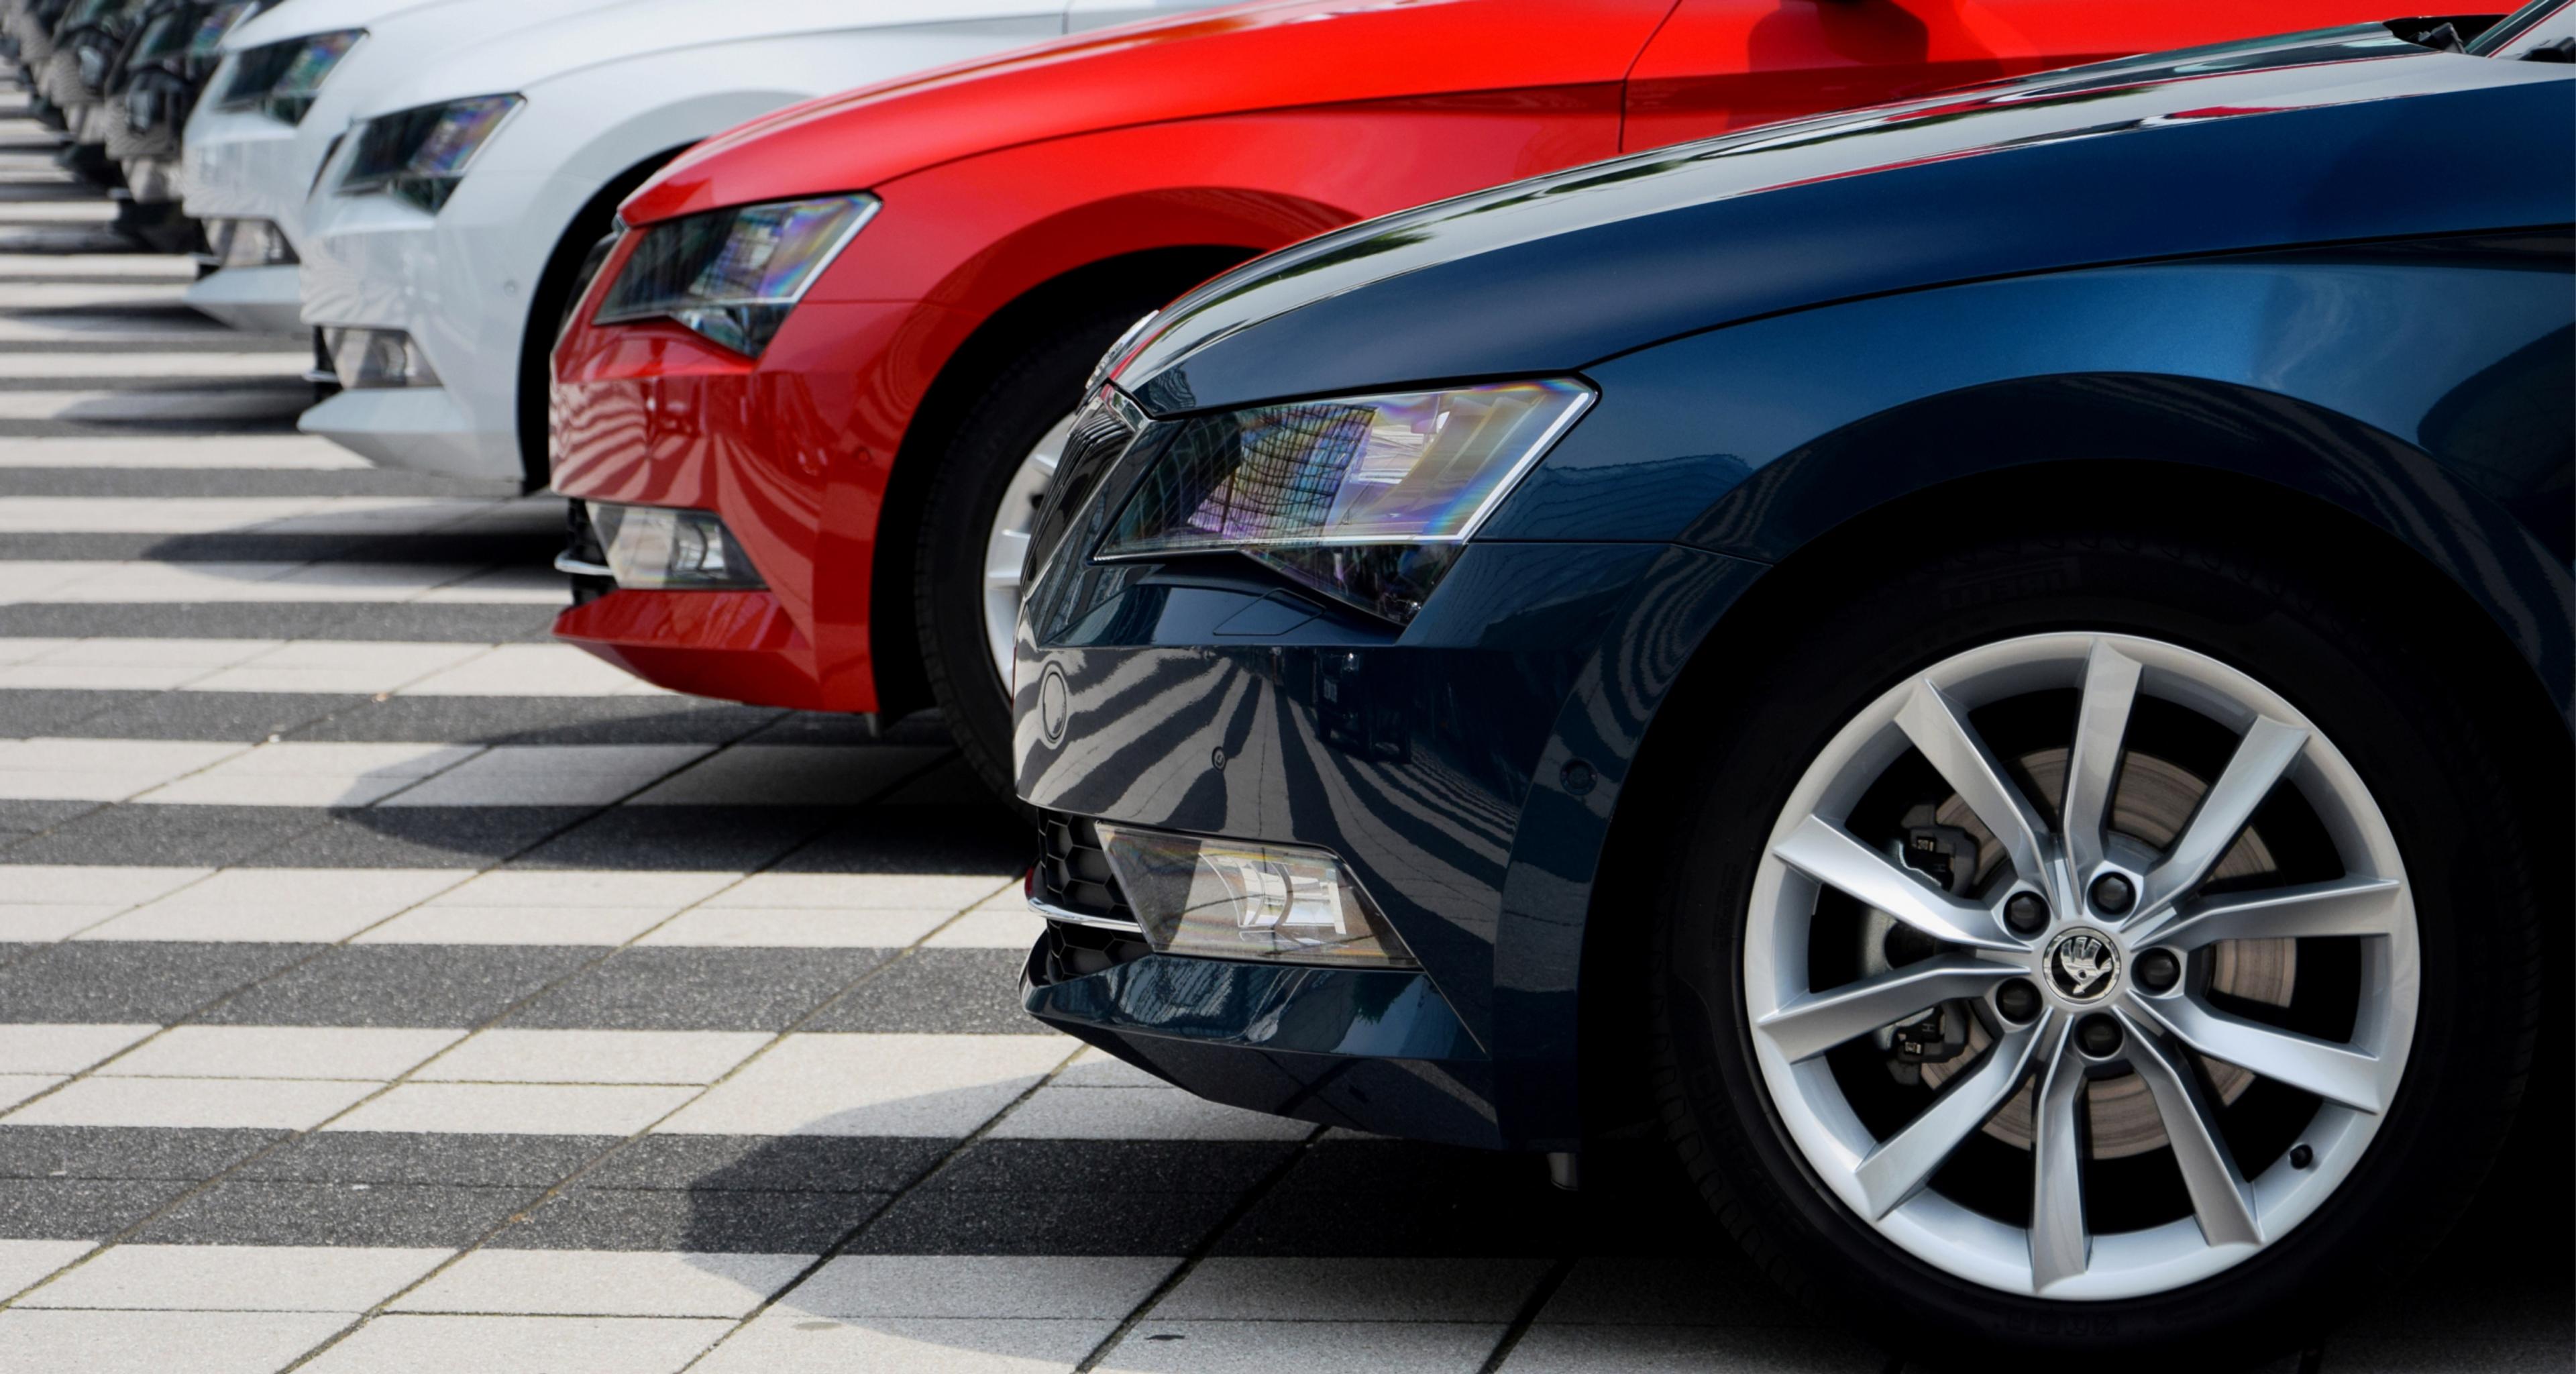 Why are more fleet owners considering usage-based insurance?